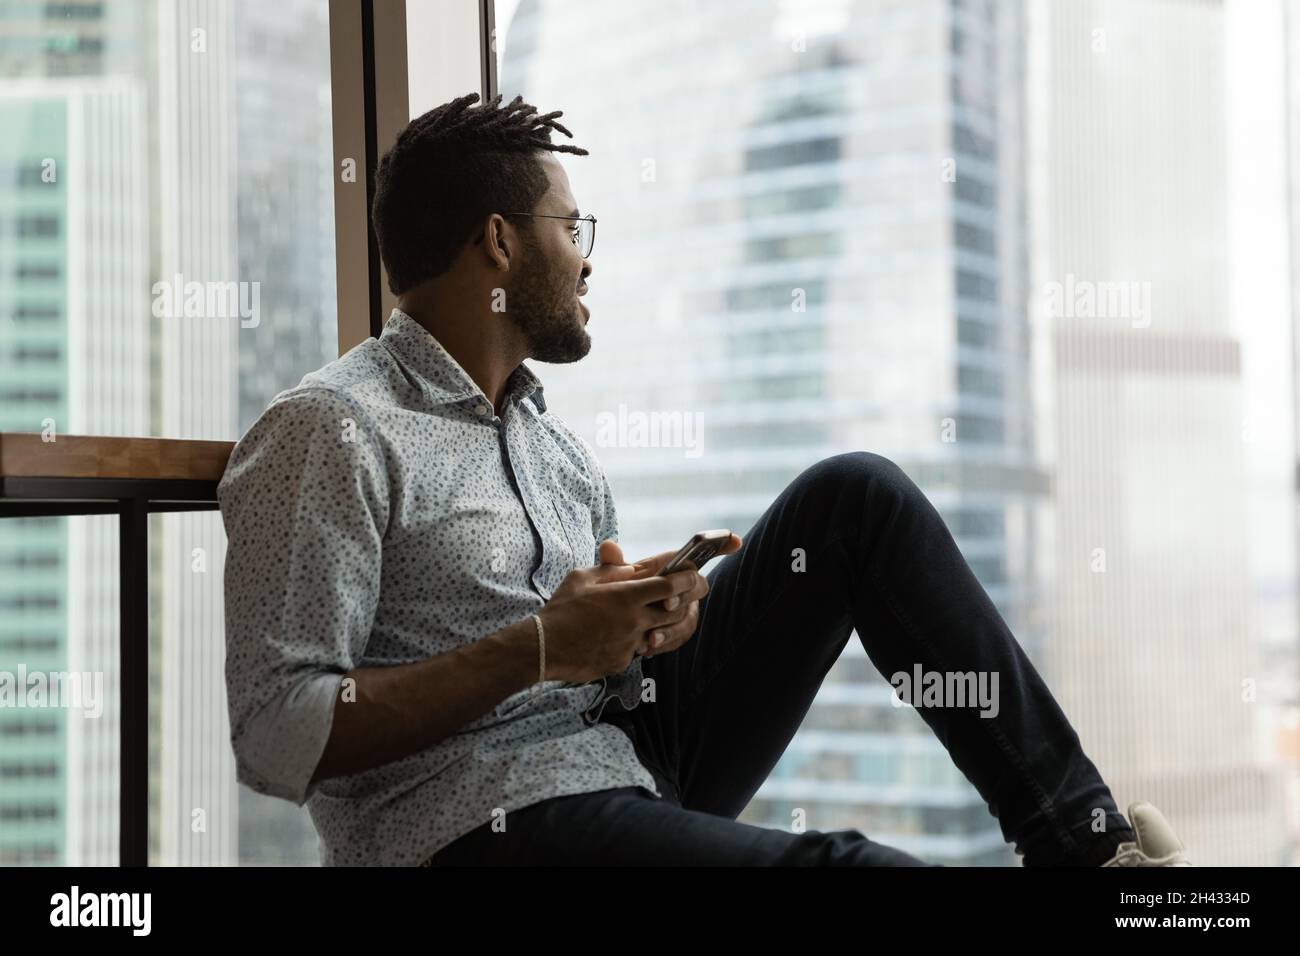 Dreamy carefree mixed race man using cellphone. Stock Photo